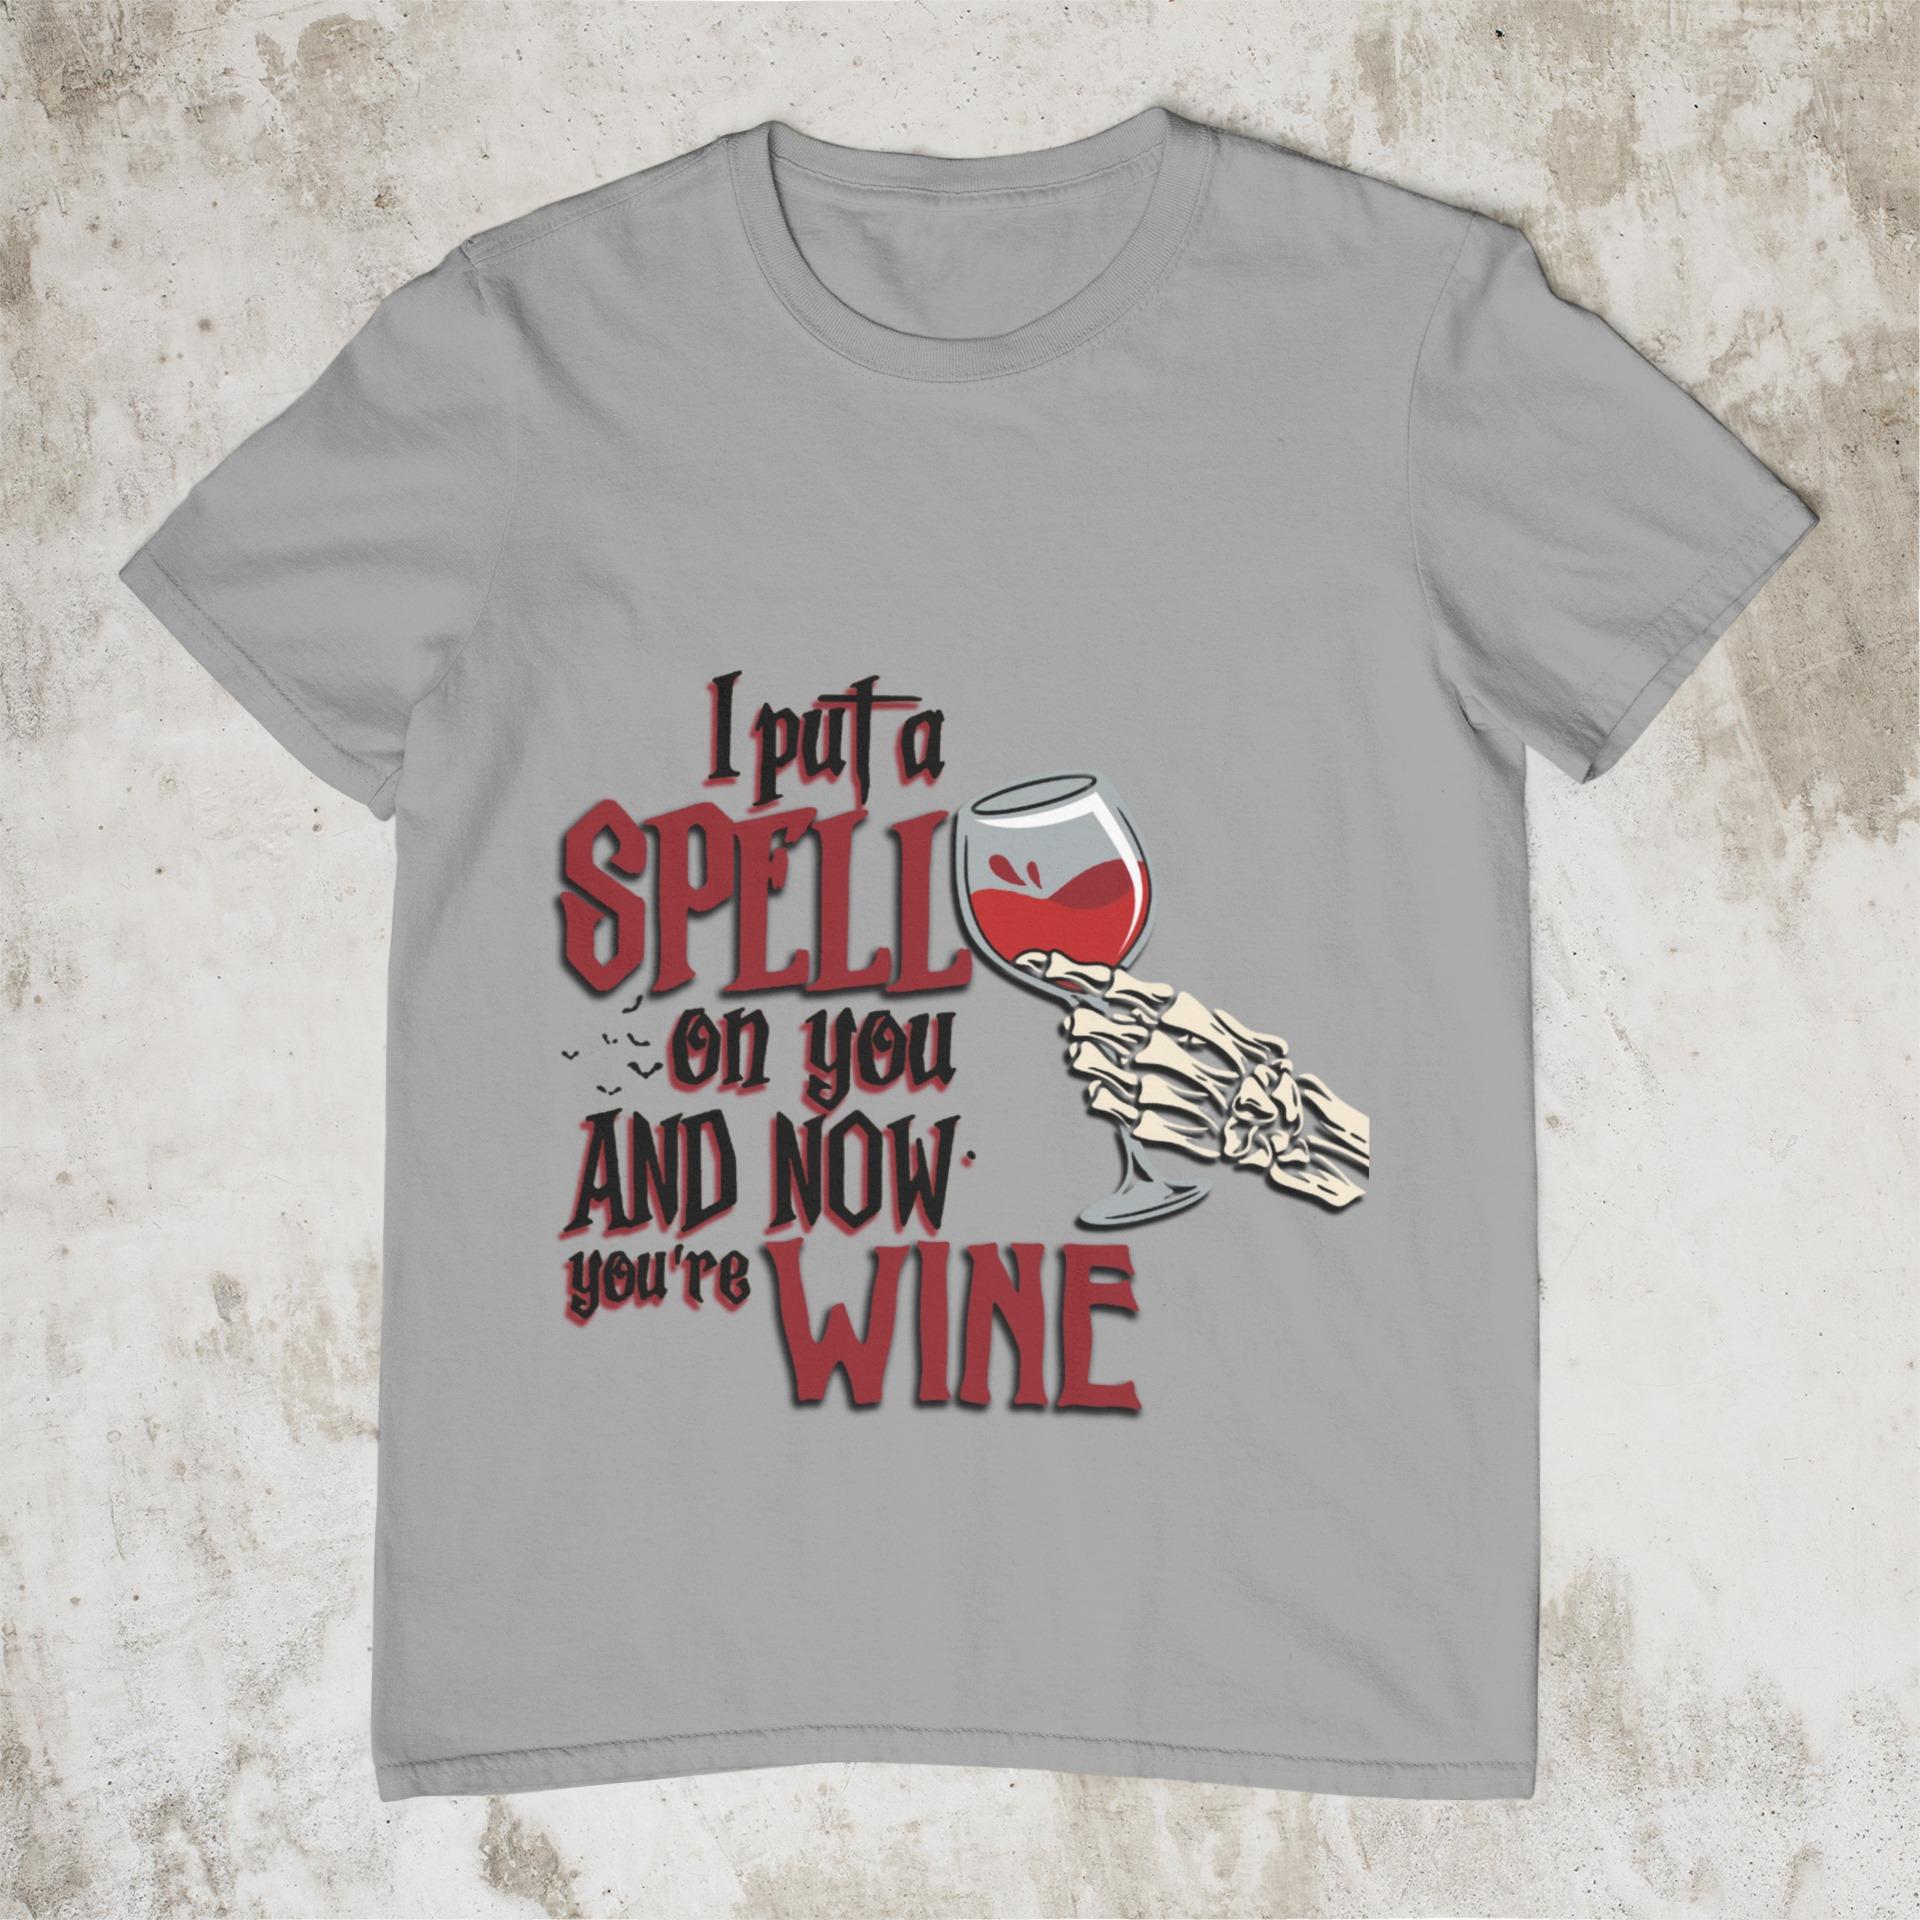 I put a spell on you and now you're wine - Skull and wine, Halloween gift for wine people